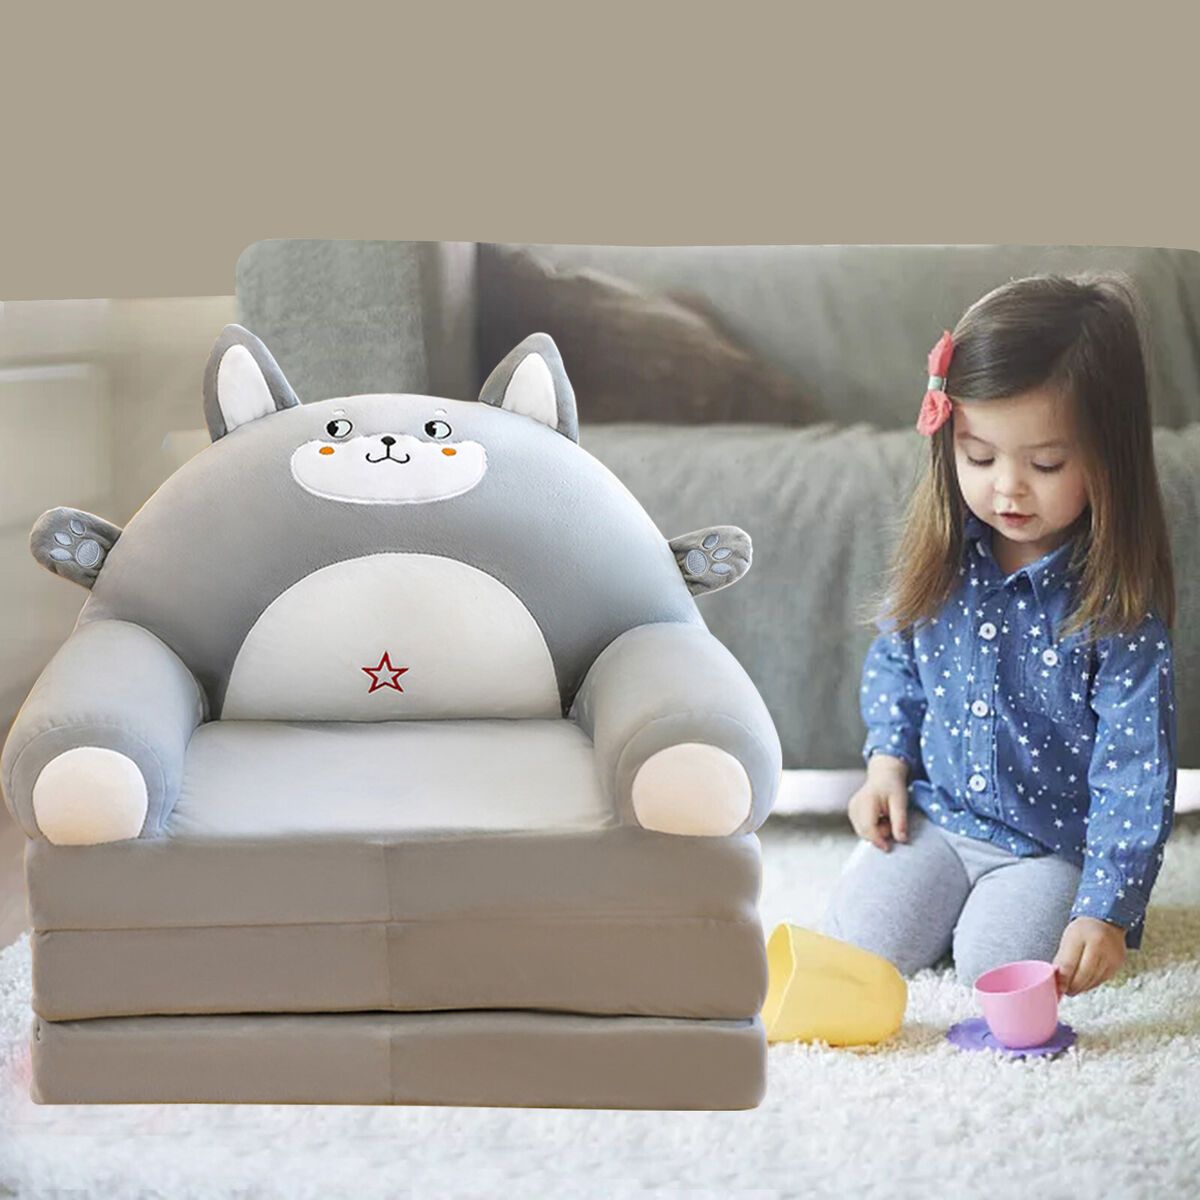 Plush Foldable Kids Sofa Backrest Armchair 2 In 1 Foldable Without Liner  Filler | Ebay Inside 2 In 1 Foldable Sofas (View 4 of 15)